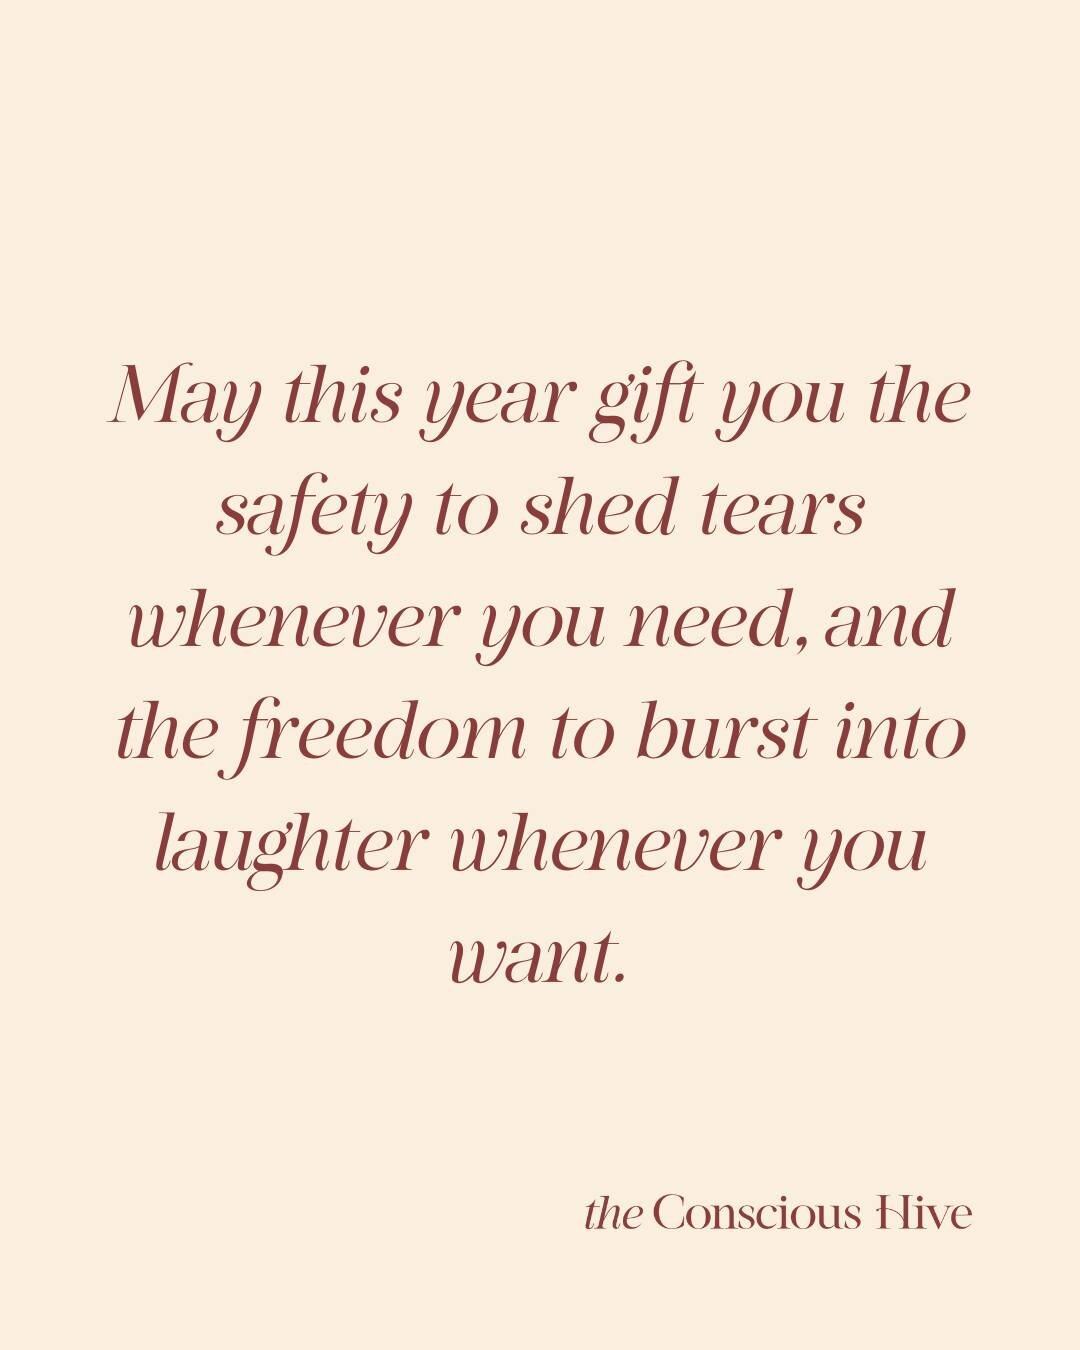 In this New Year...

May you receive all the support you need to be the incredible parent you aspire to be for your children. May this year bring you the resources and strength so you can prioritize your own needs too.

Here's my wish for you to see 